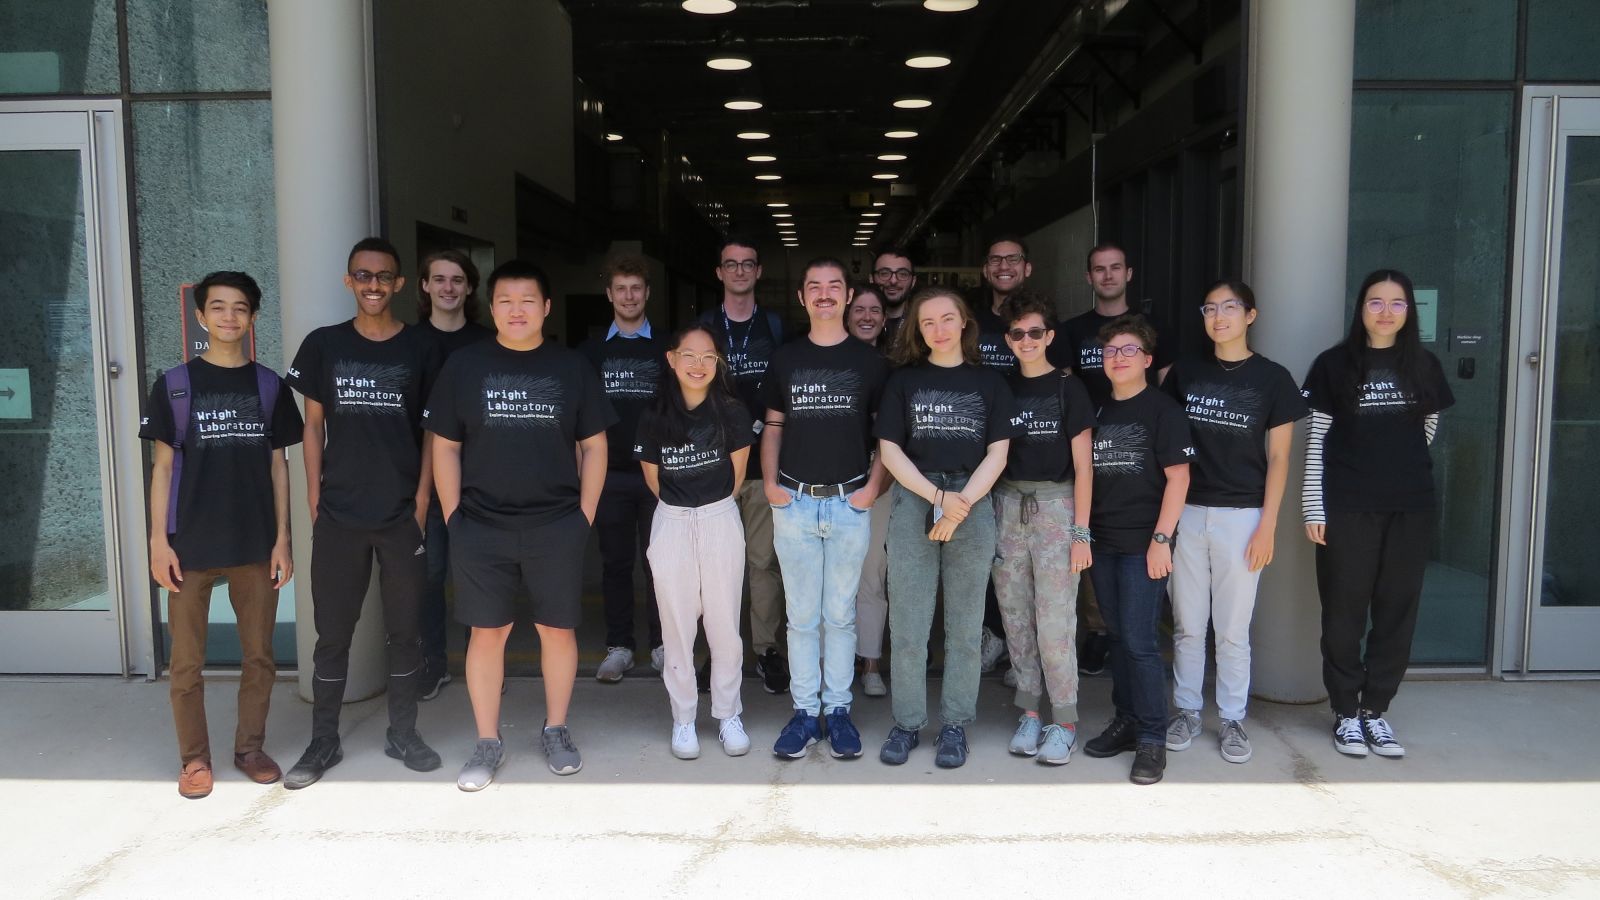 large group of people posing in front of a building with black Wright Lab T-shirts on.